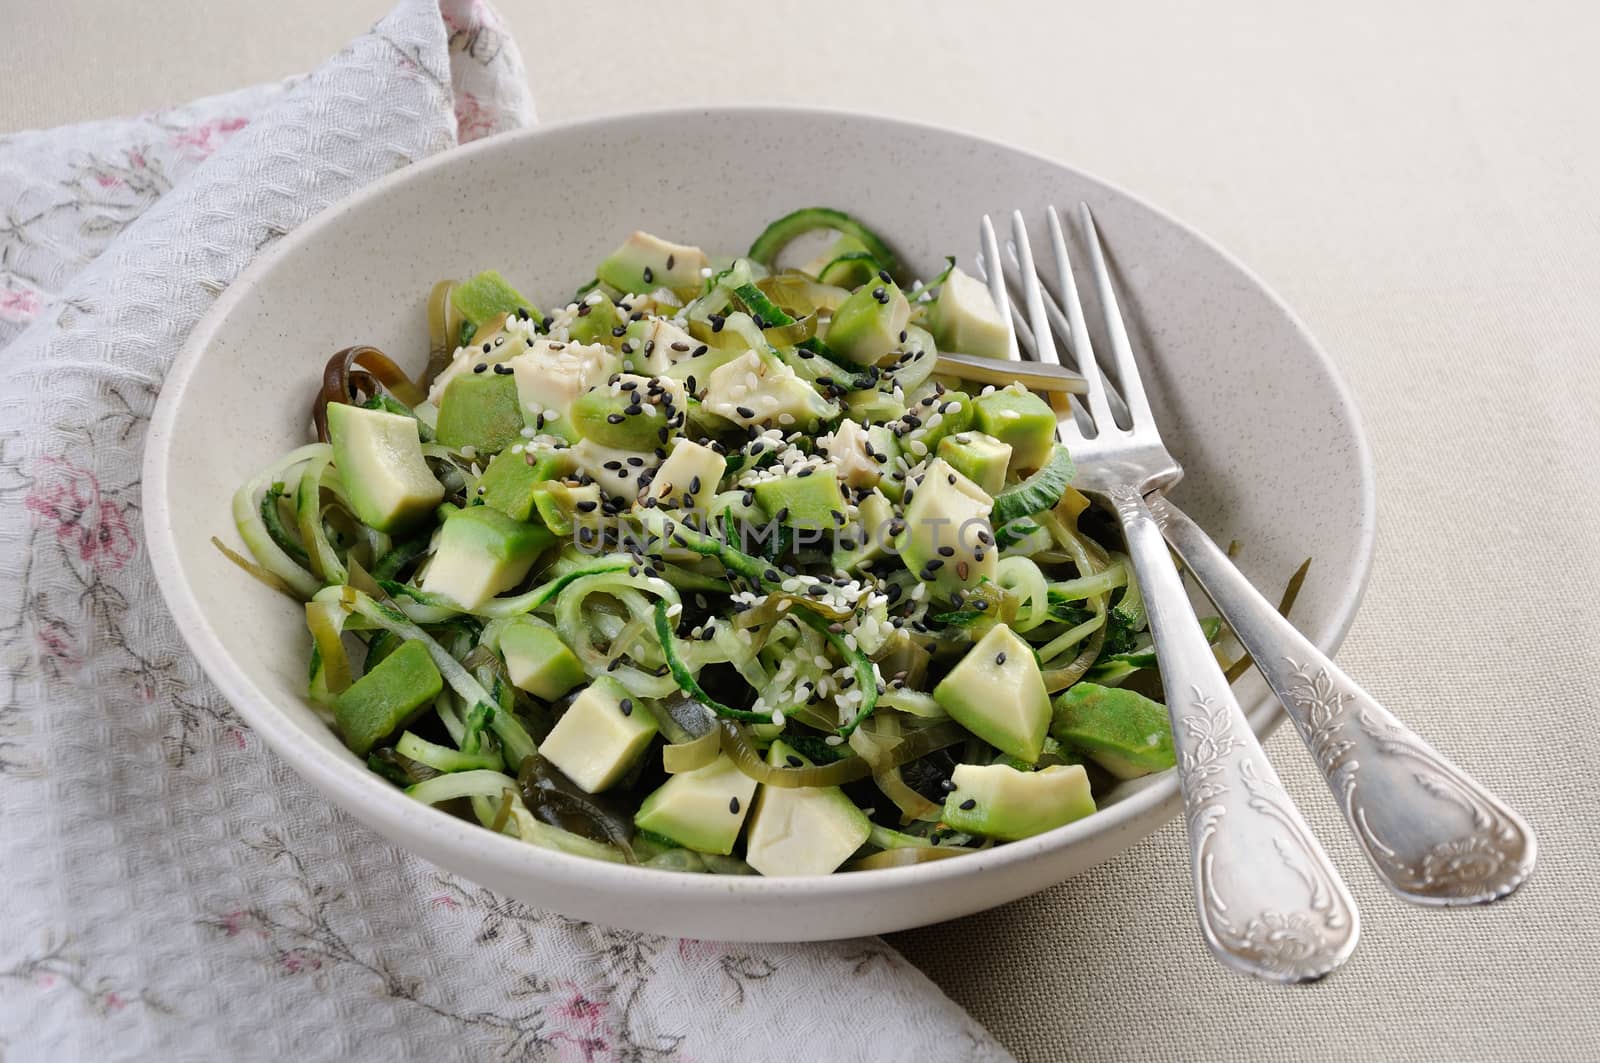 Salad from noodles from cucumbers and laminaria, slices of avocado with sesame